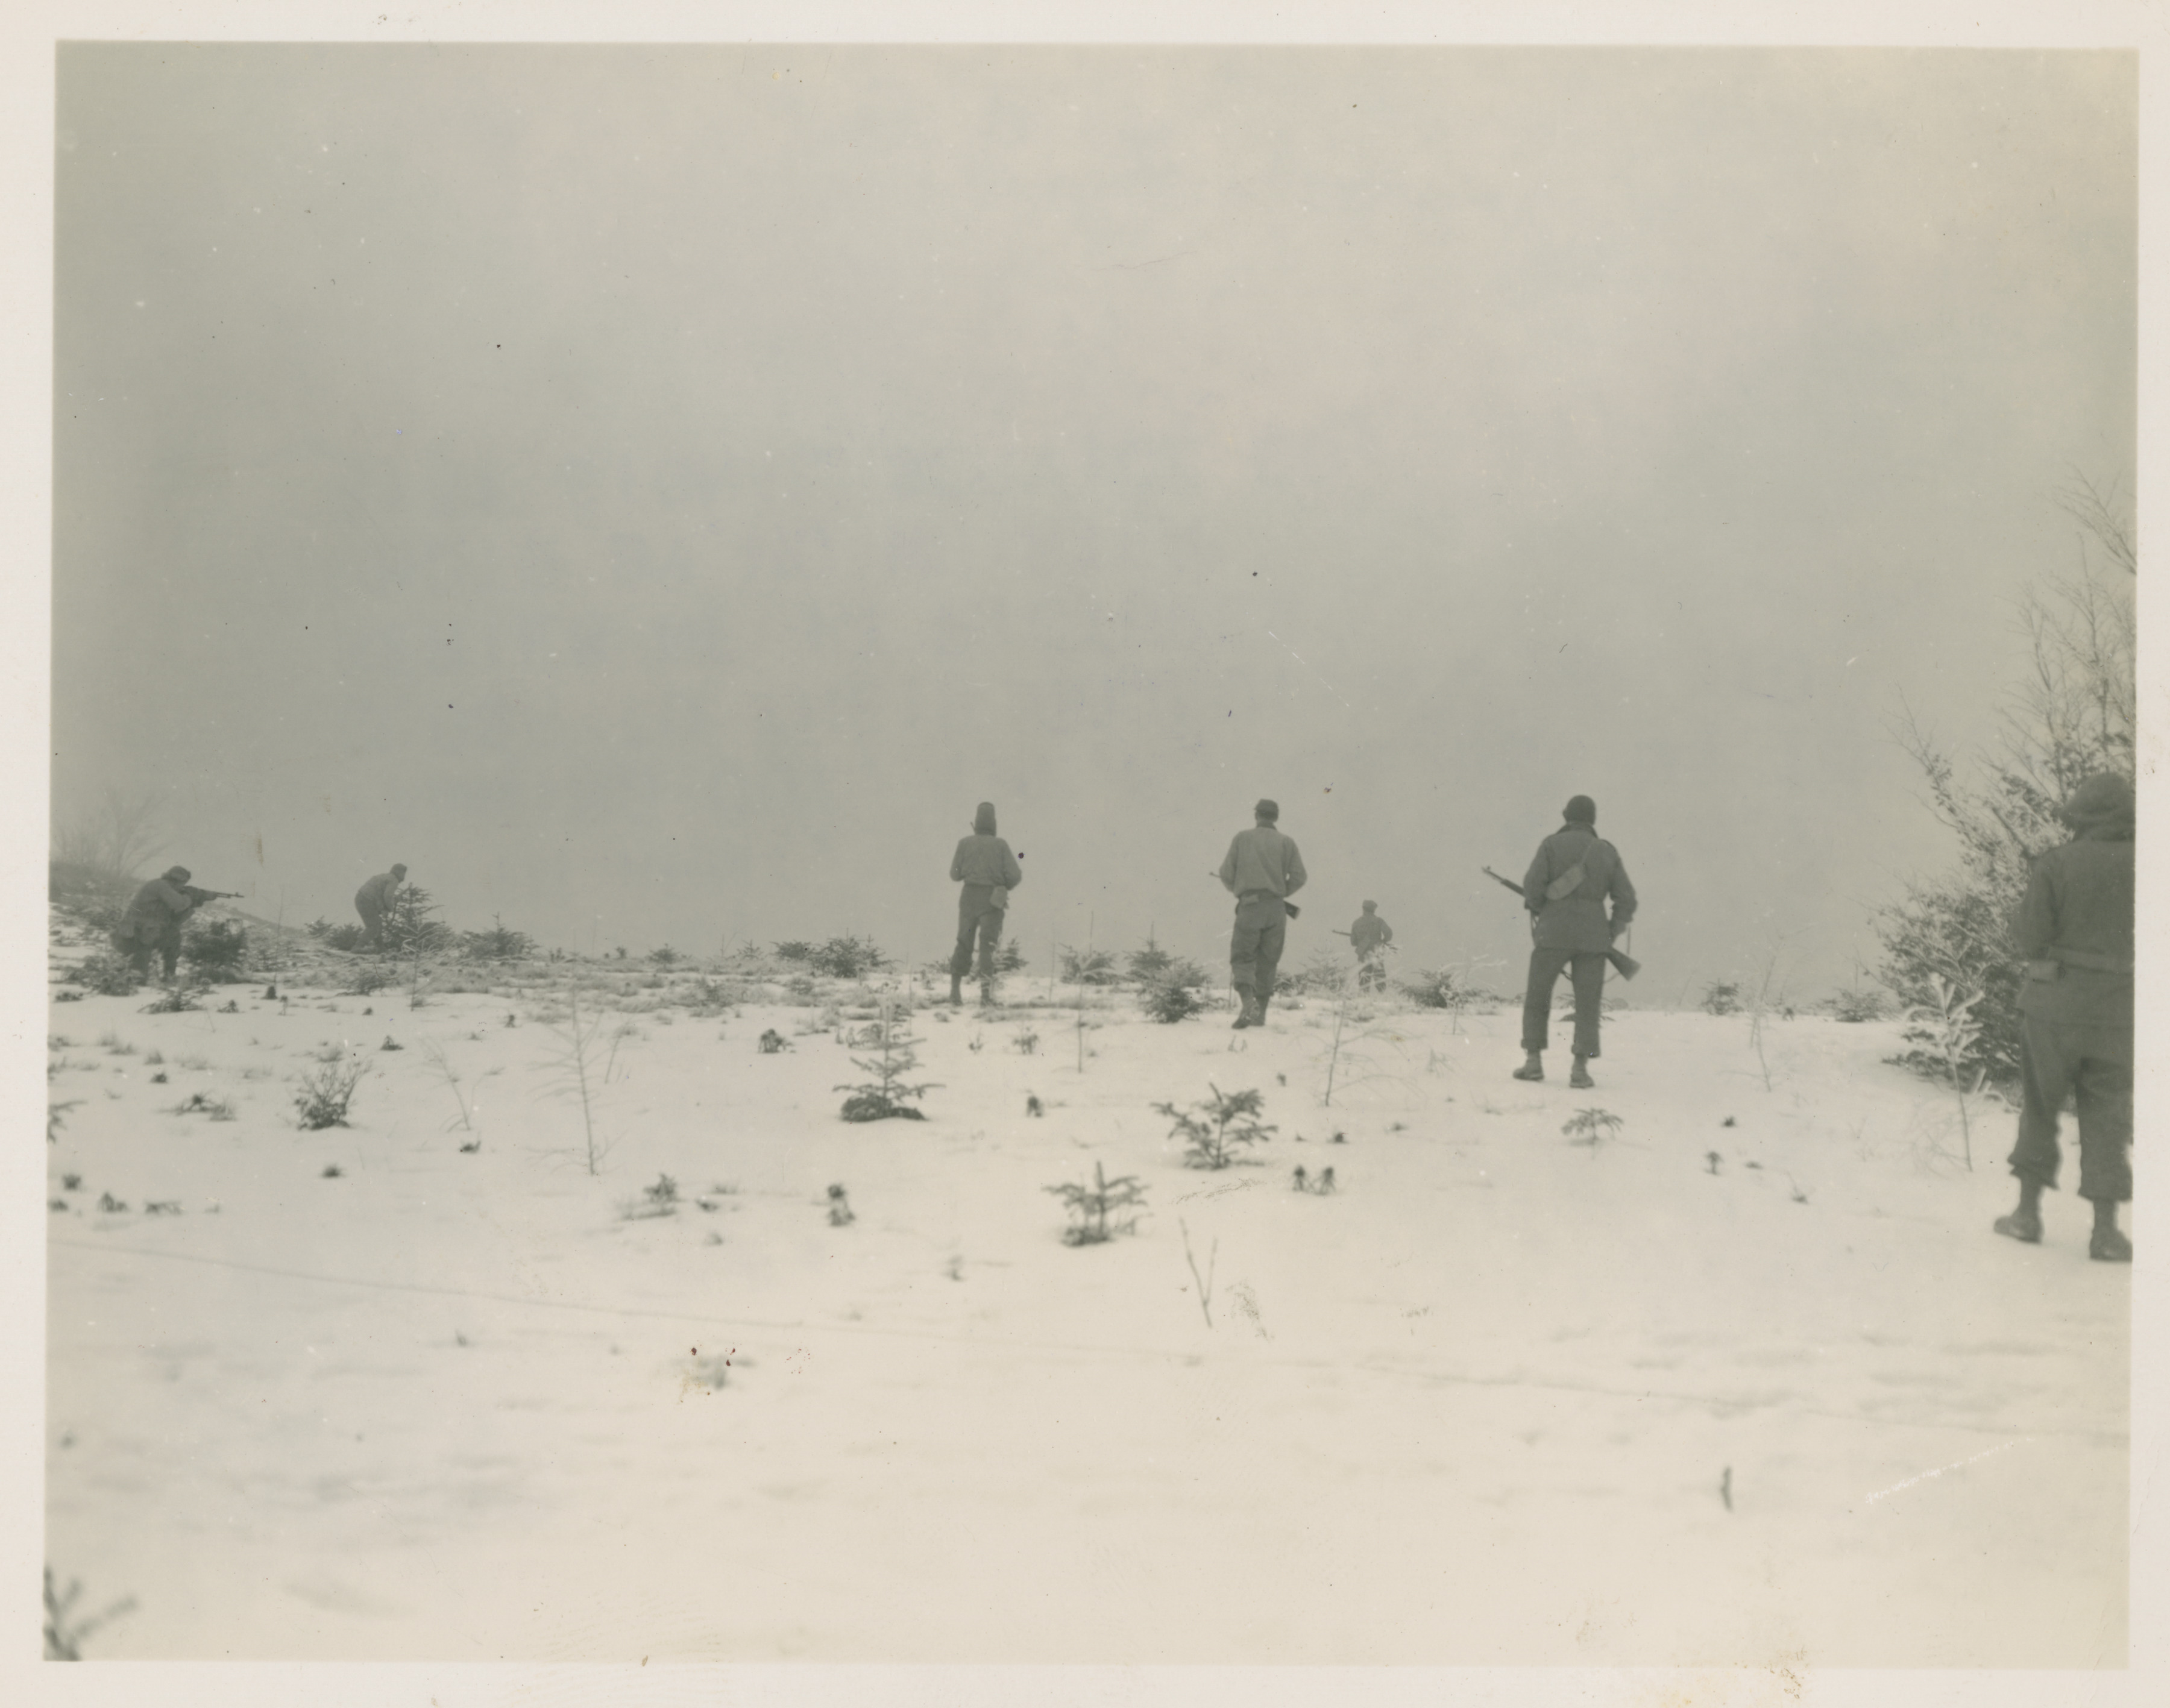 American soldiers on patrol through snow in Italy in November 1944 ...